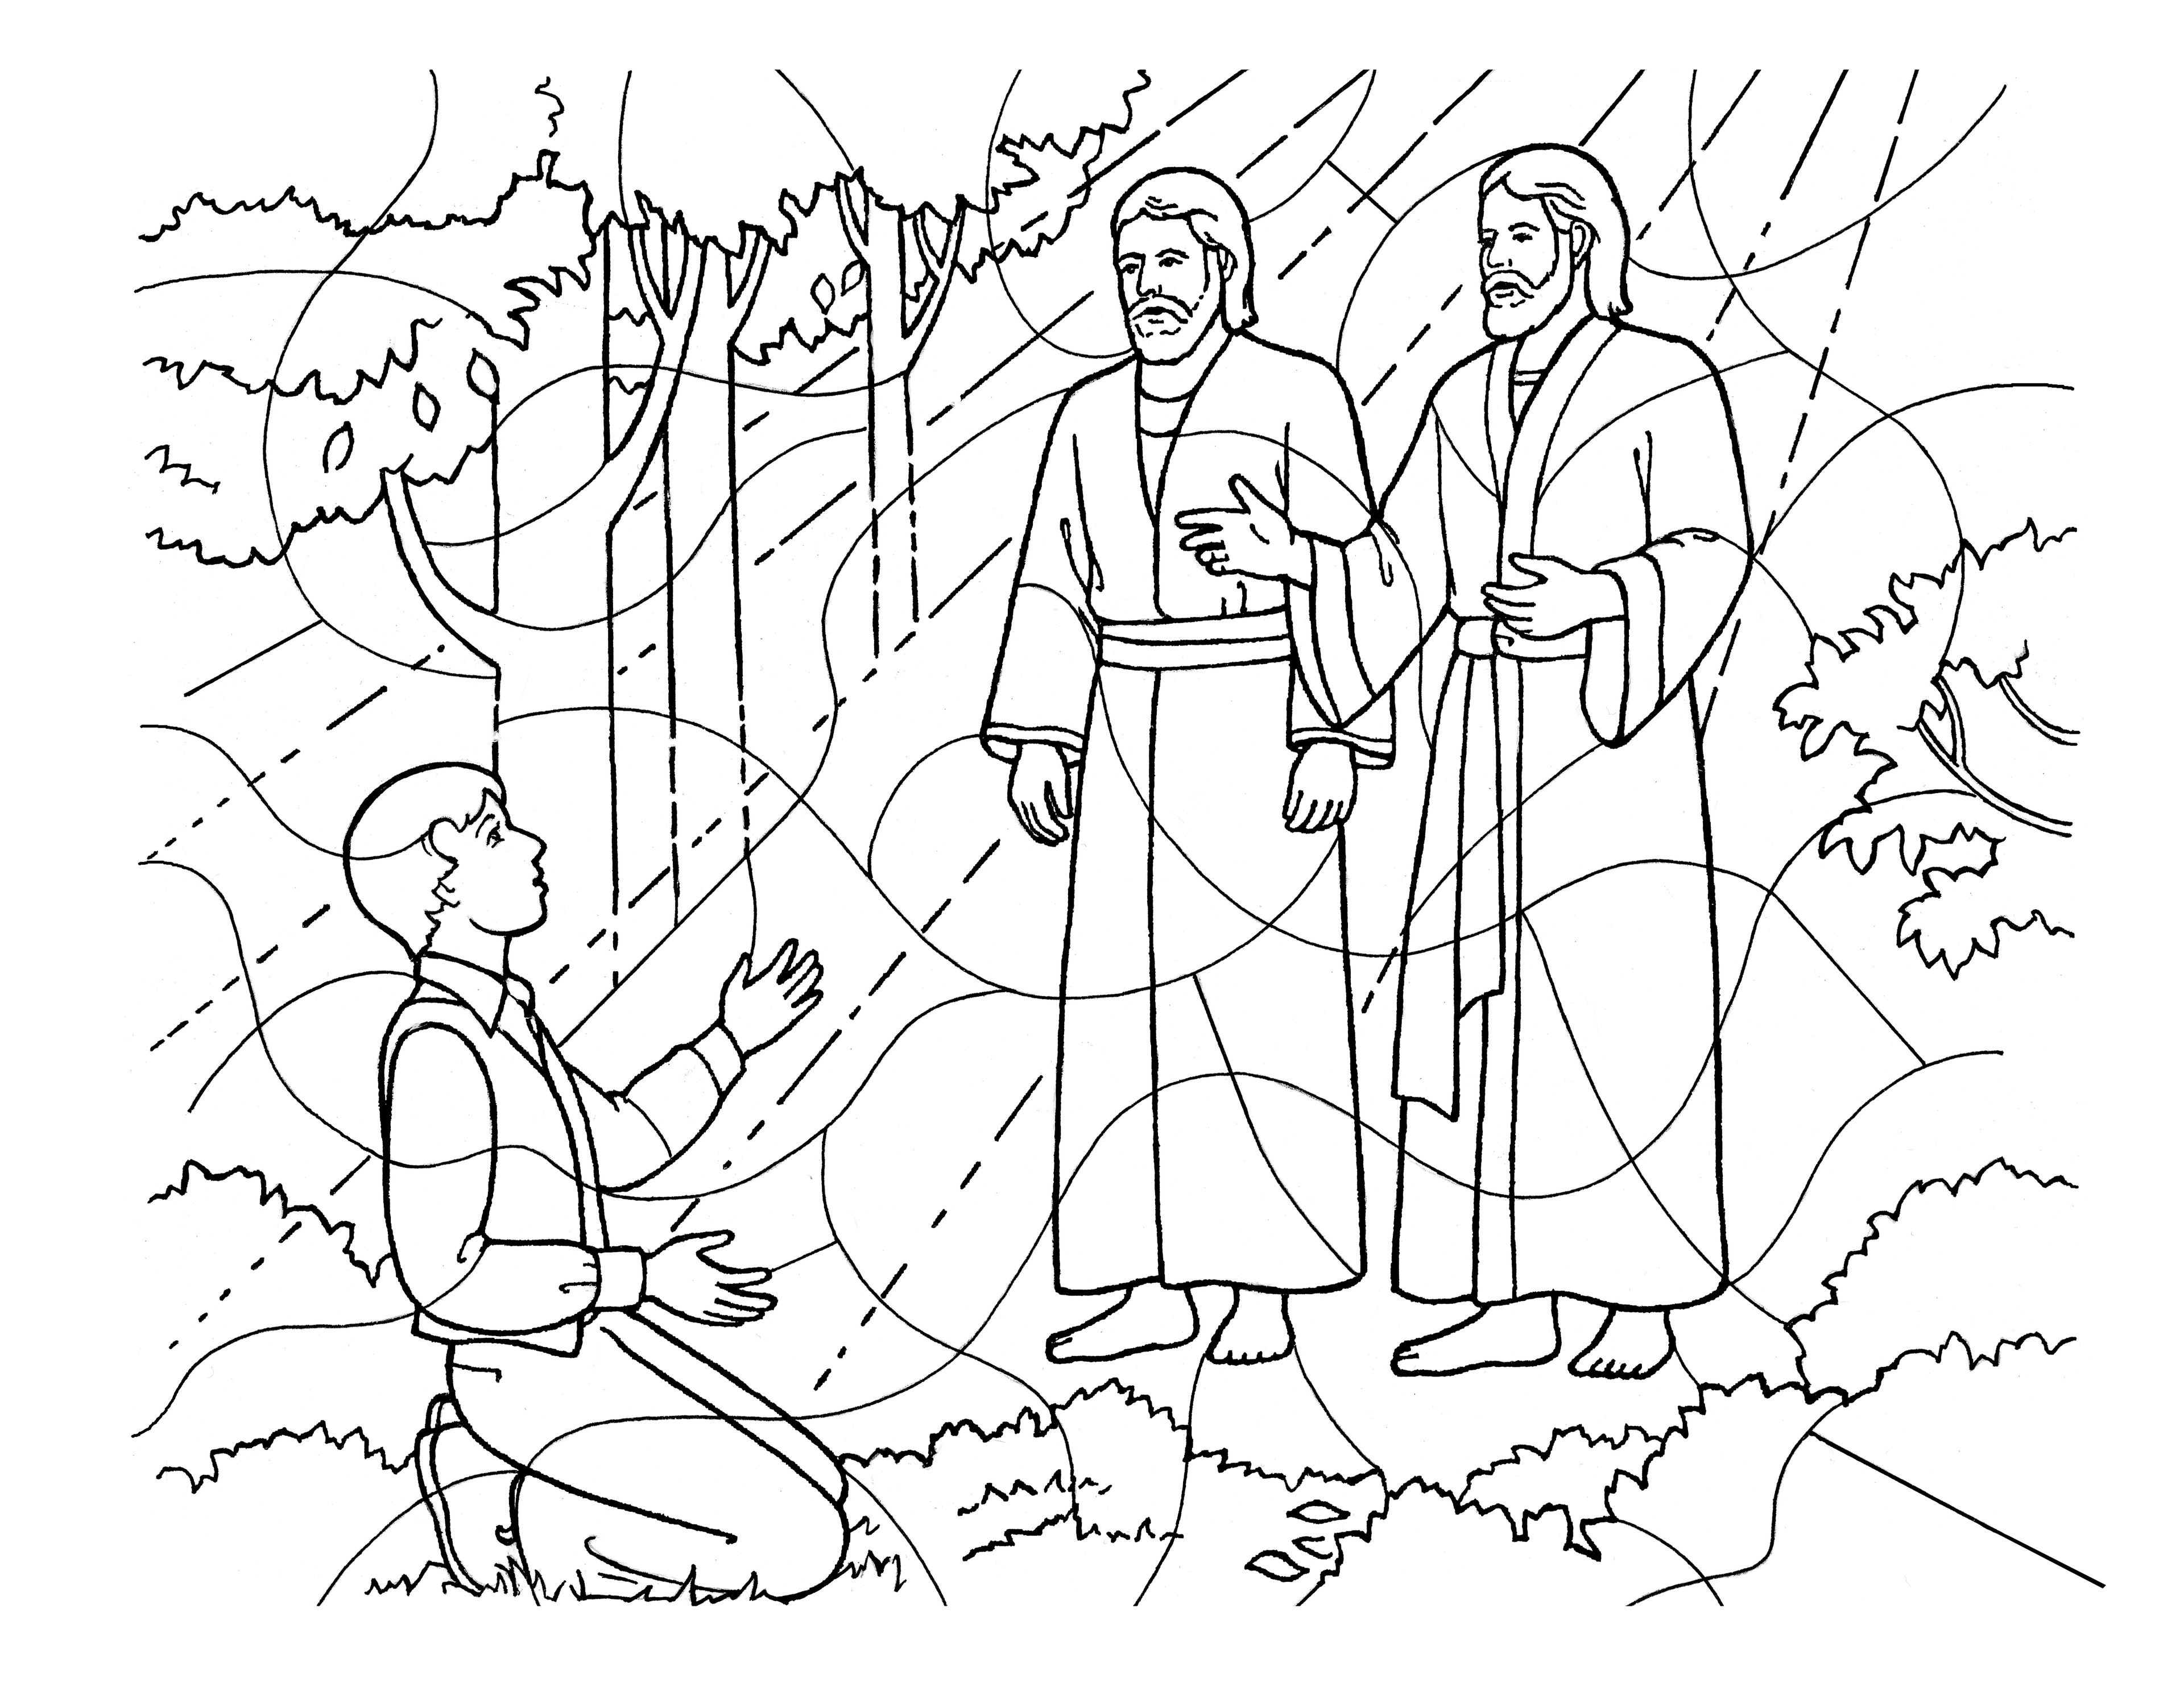 A coloring page of Heavenly Father and Jesus Christ appearing to Joseph Smith.